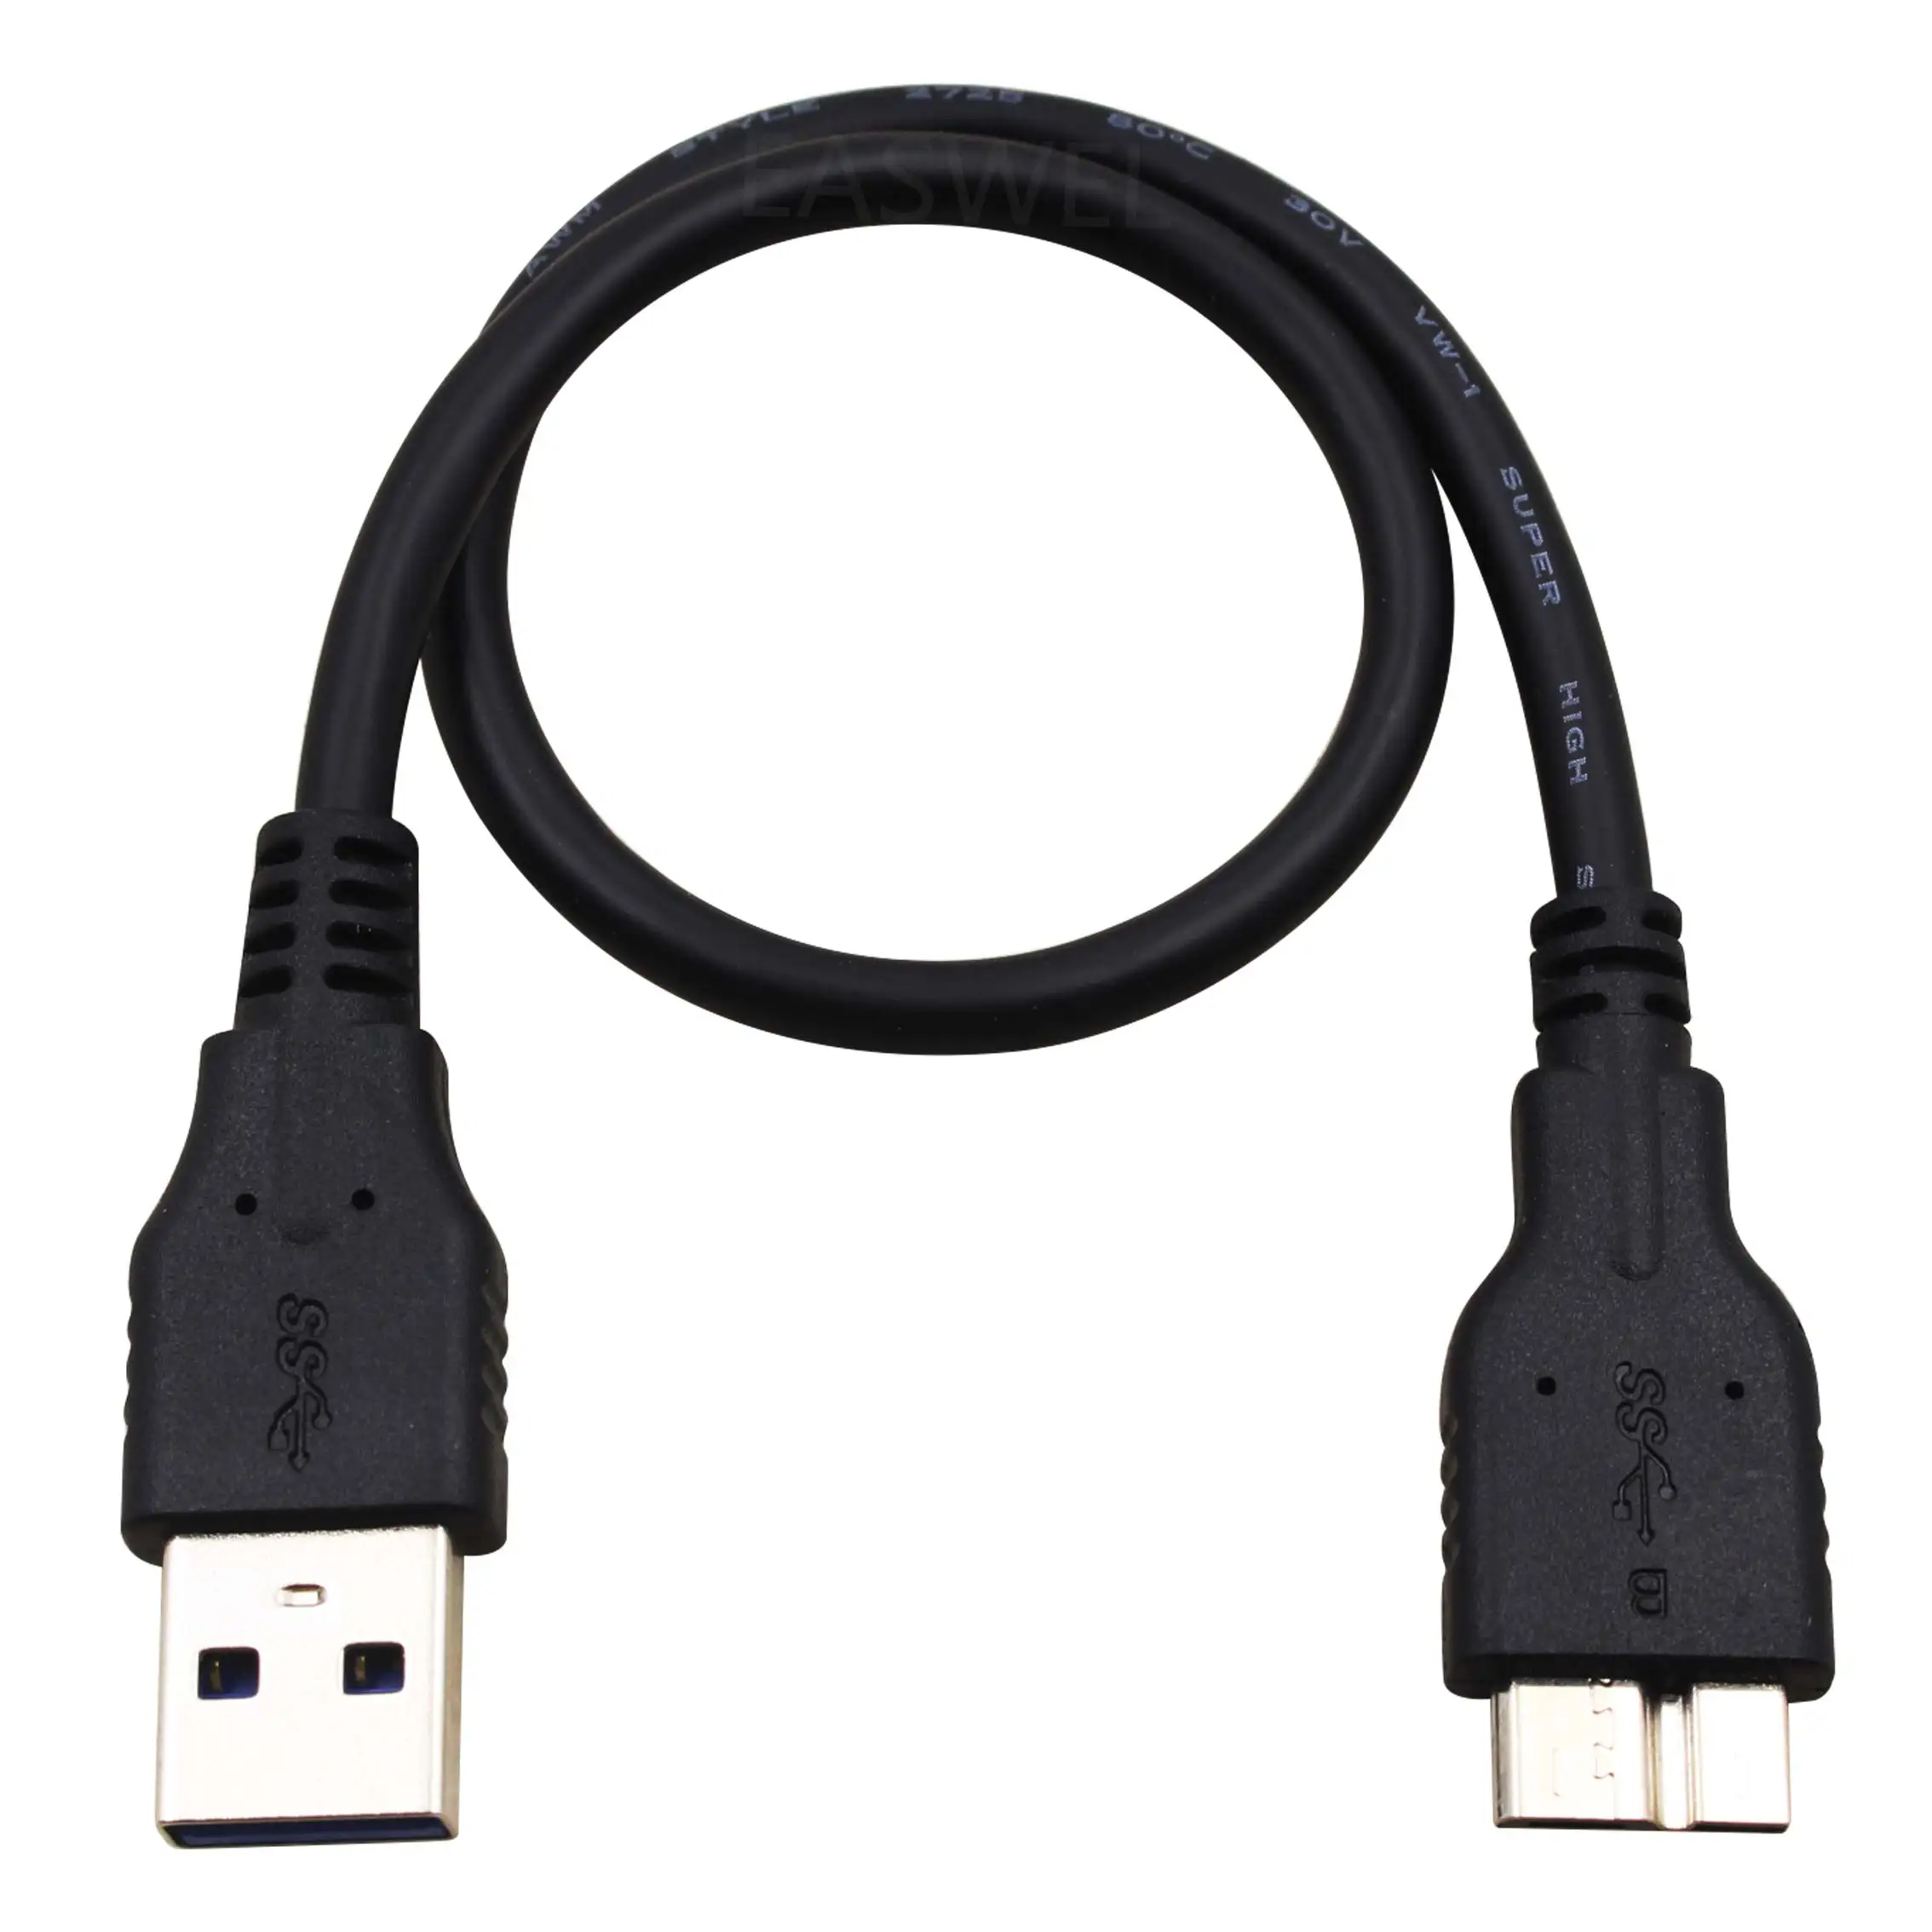 Storing stopverf Toeval 30cm Usb Data Cable Cord For Wd My Passport Ultra 1tb Hard Drive  Wdbzfp0010bbk - Data Cables - AliExpress